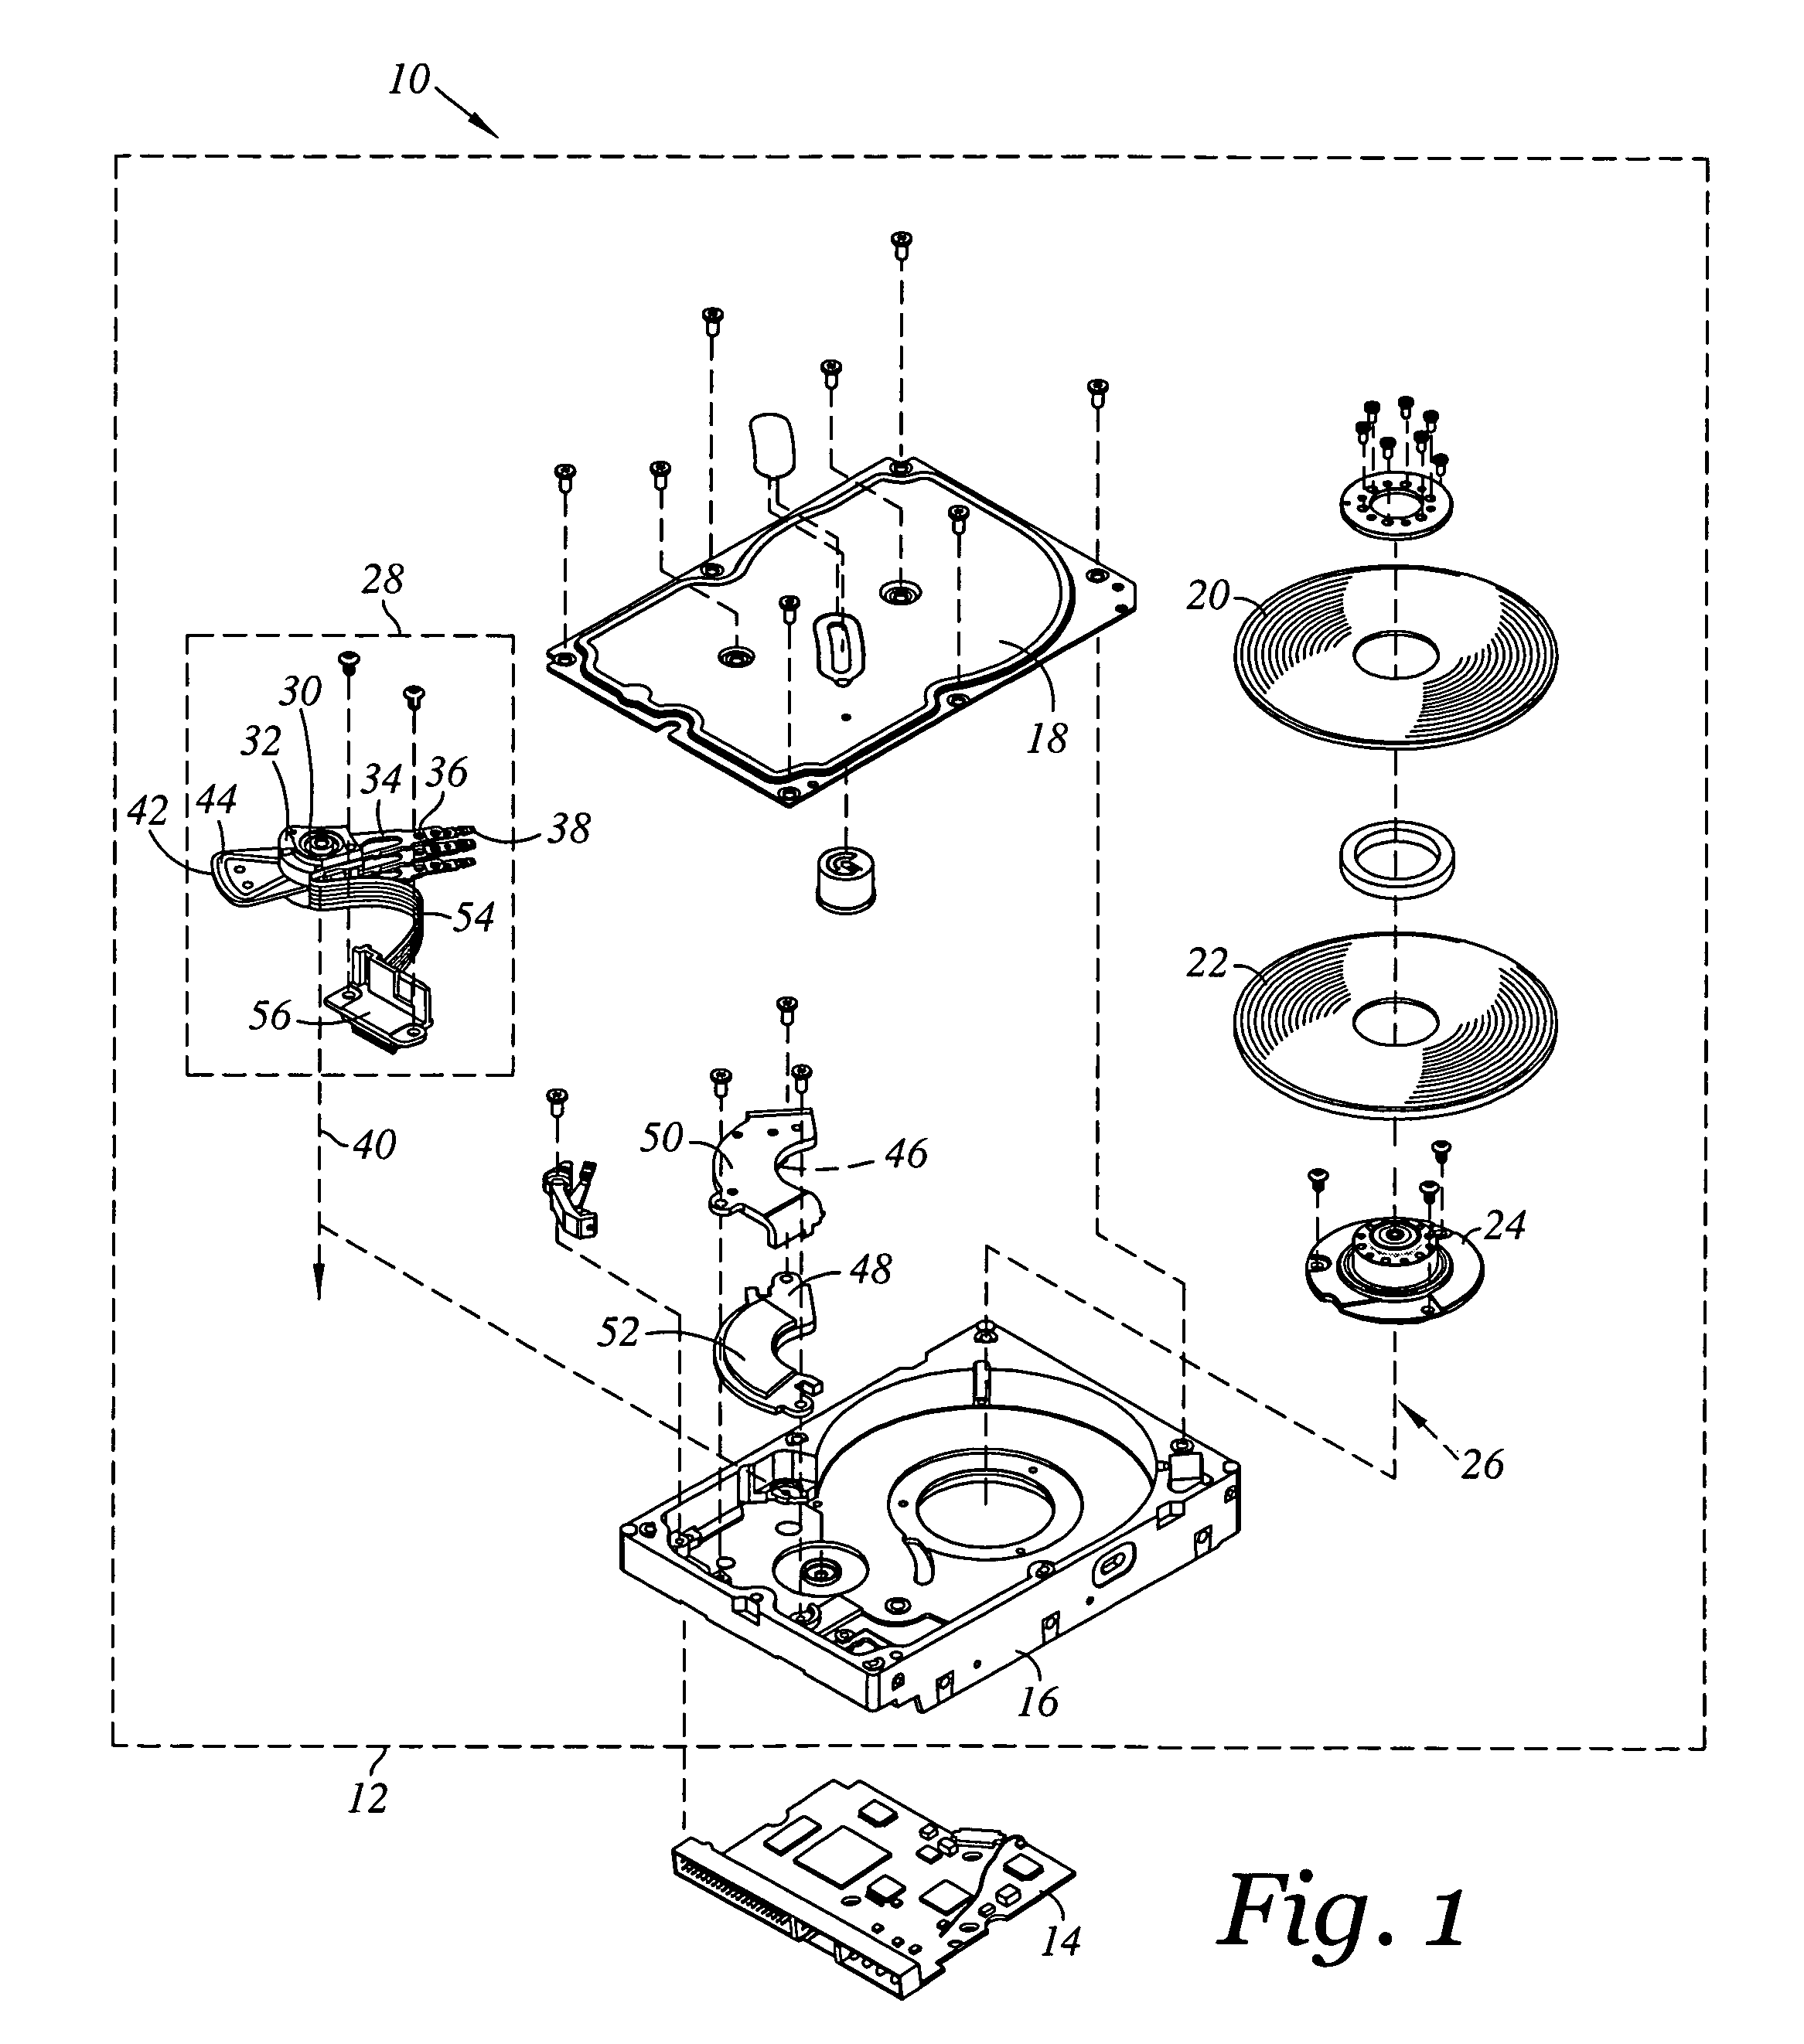 Suspension assembly with piezoelectric microactuators electrically connected to a folded flex circuit segment